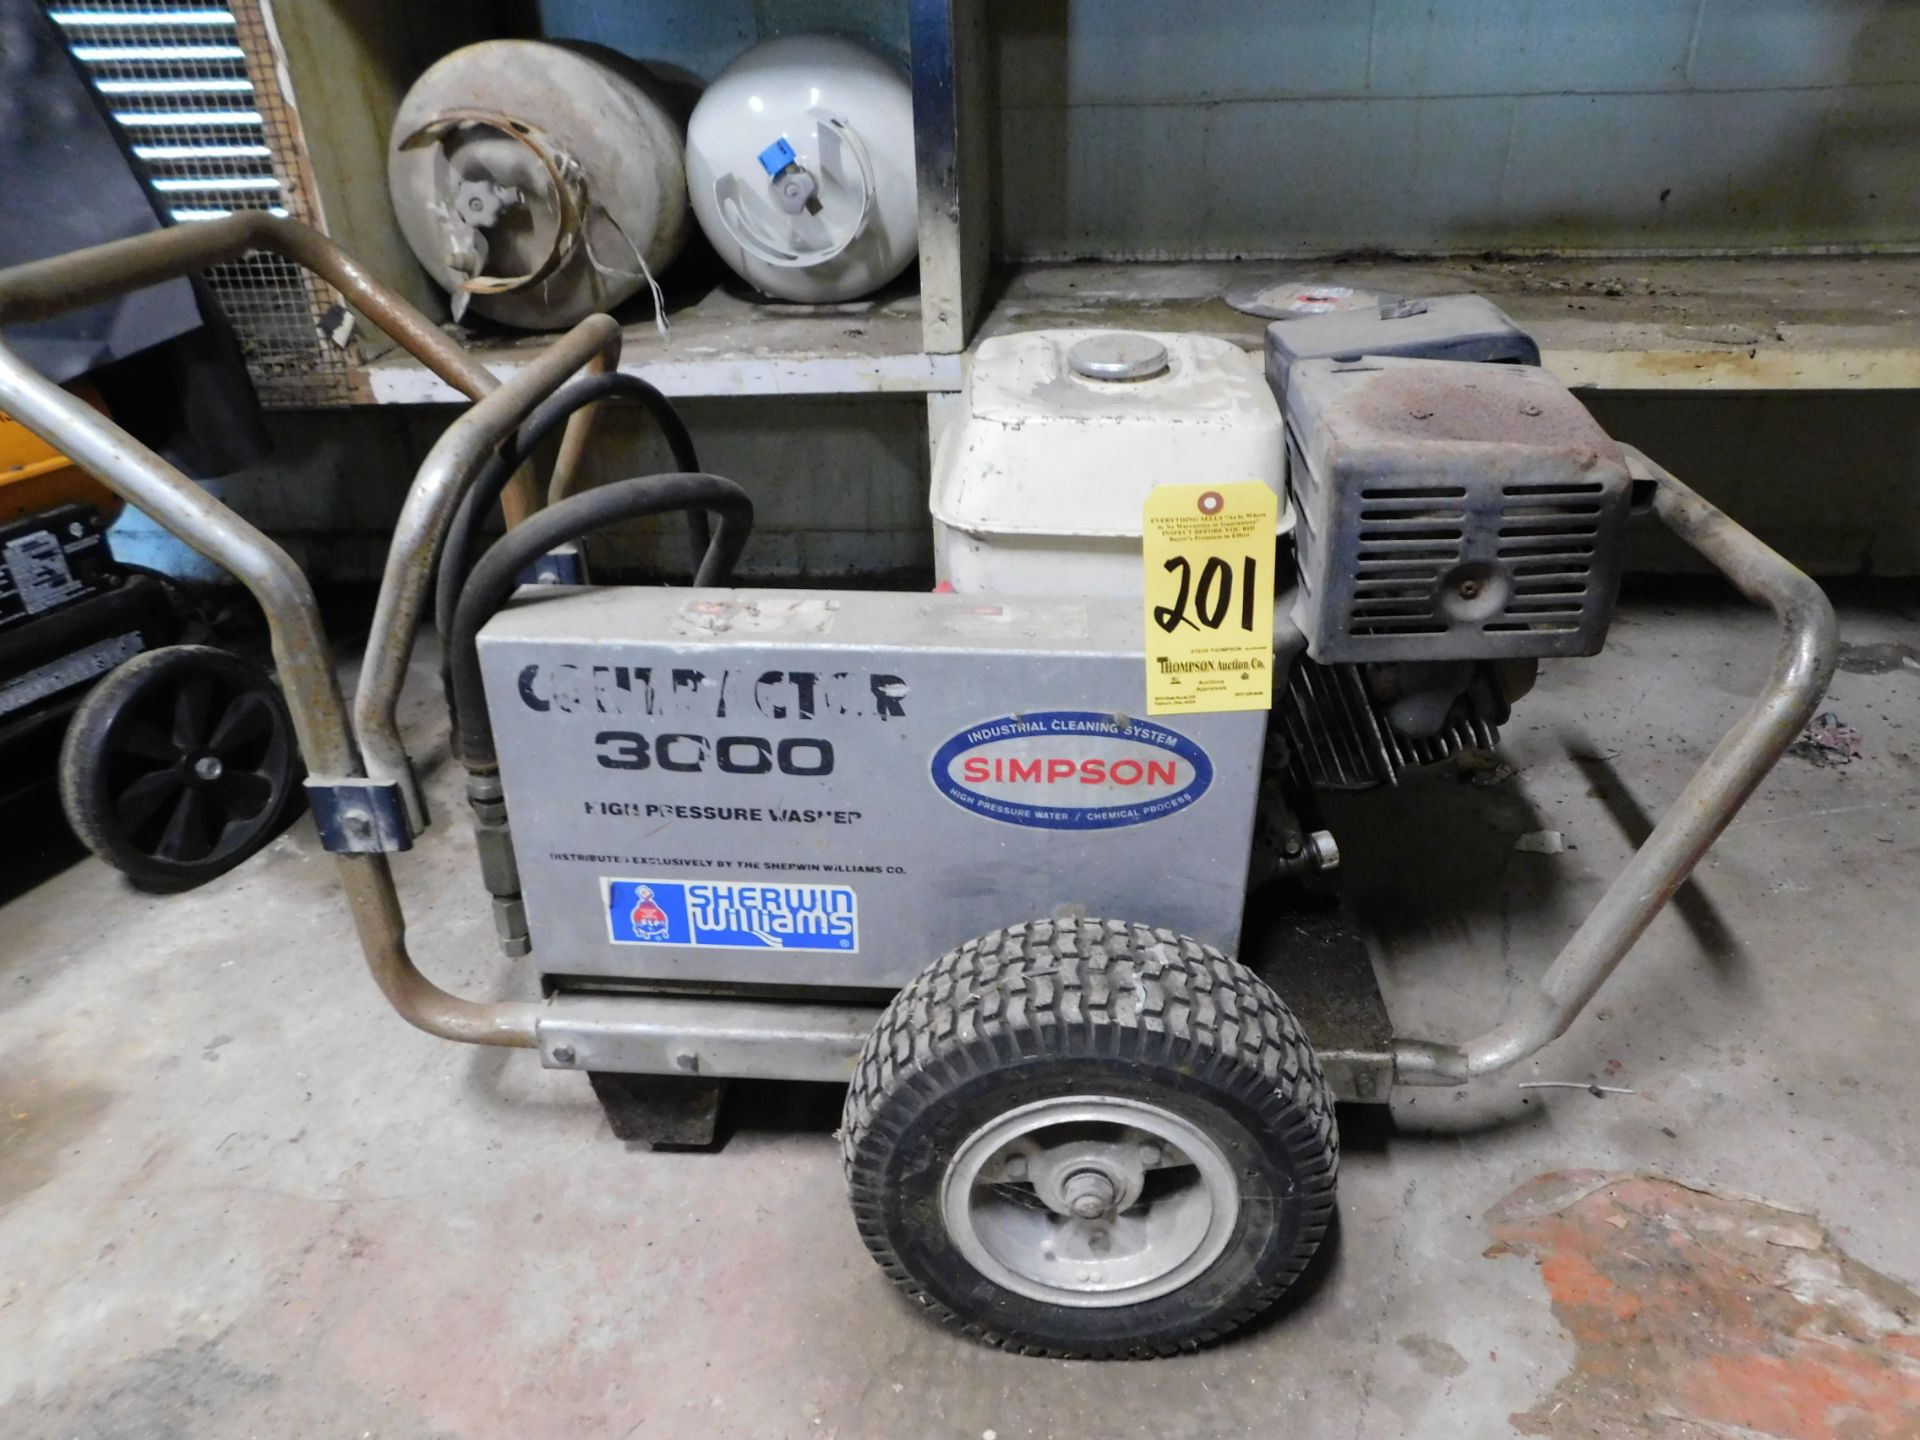 Simpson Contractor 3000 gas Powered Pressure Washer, Honda 11hp, Gas Engine